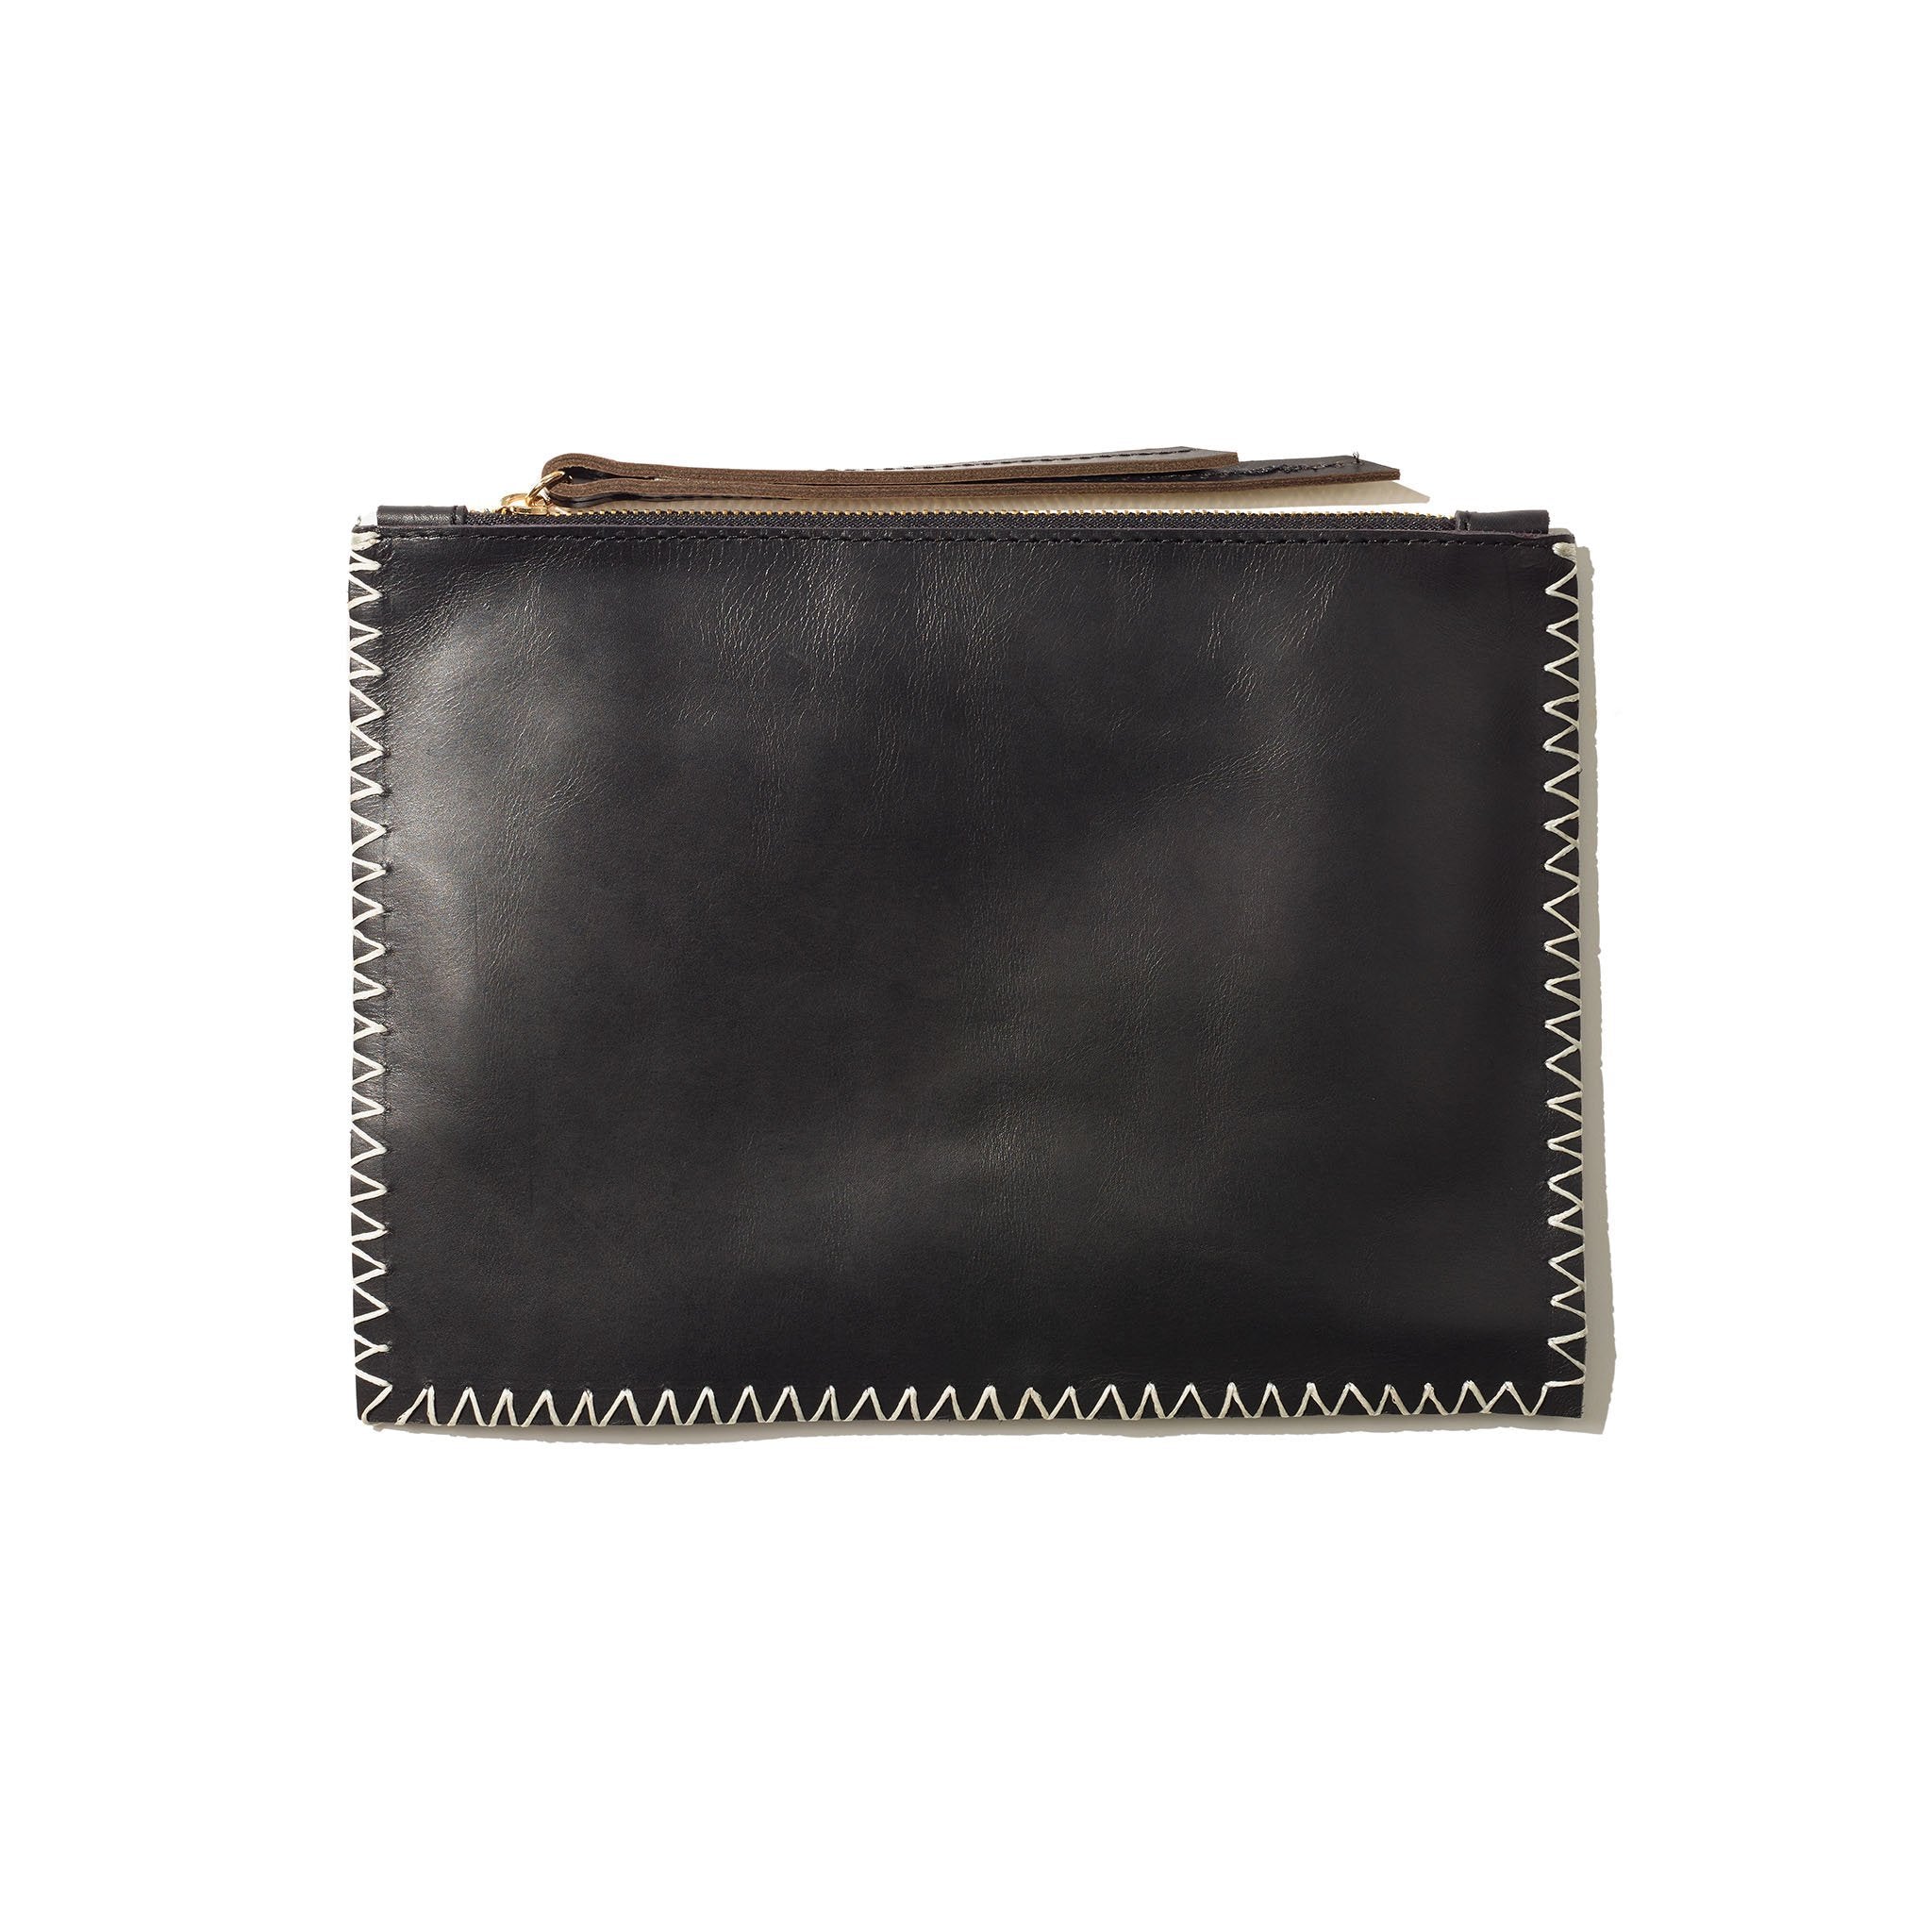 An black pouch with understated contrast stitching, handcrafted from sustainable leather.